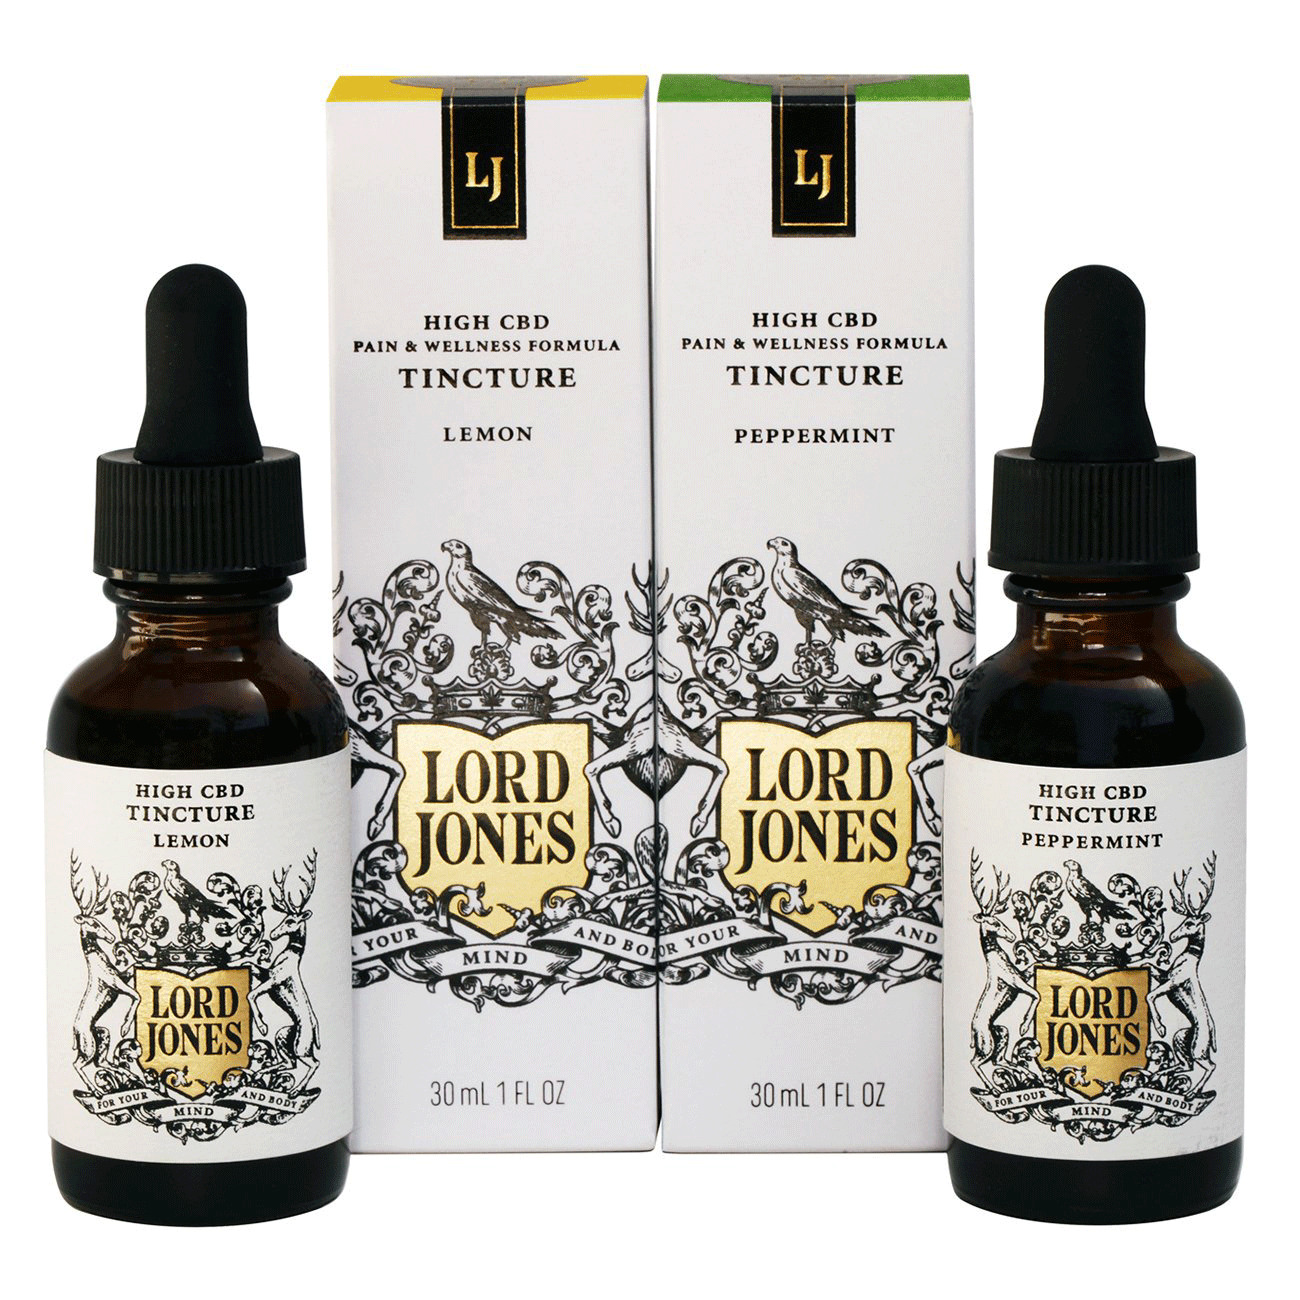 lord jones pain and wellness formula tinctures